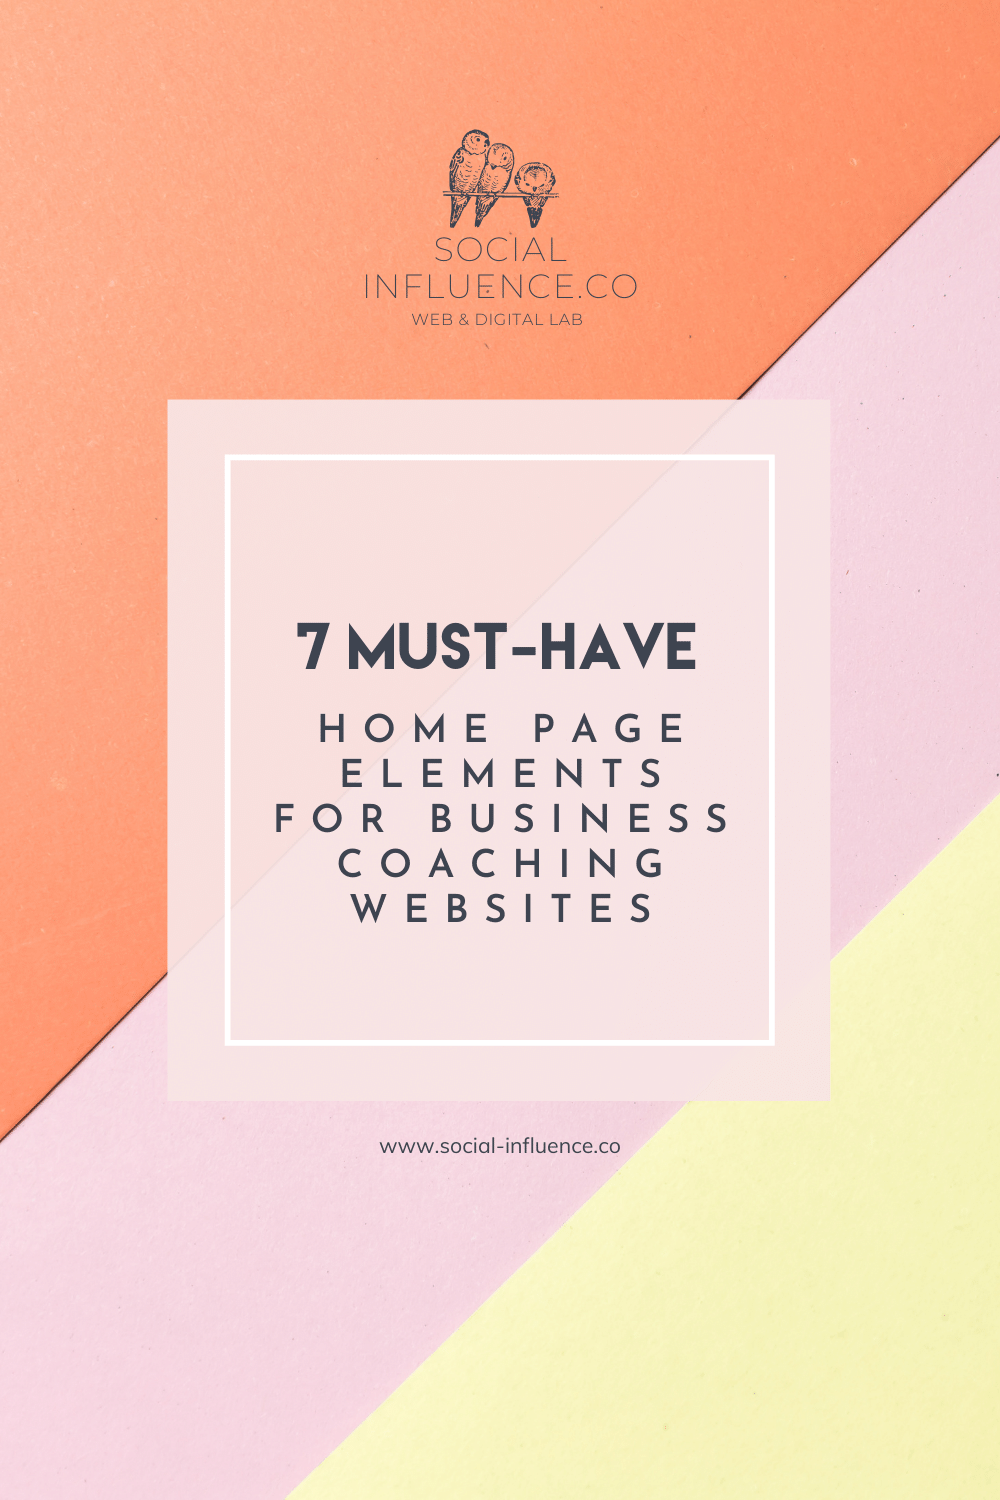 7 Must-Have Home Page Elements for Business Coaching Websites